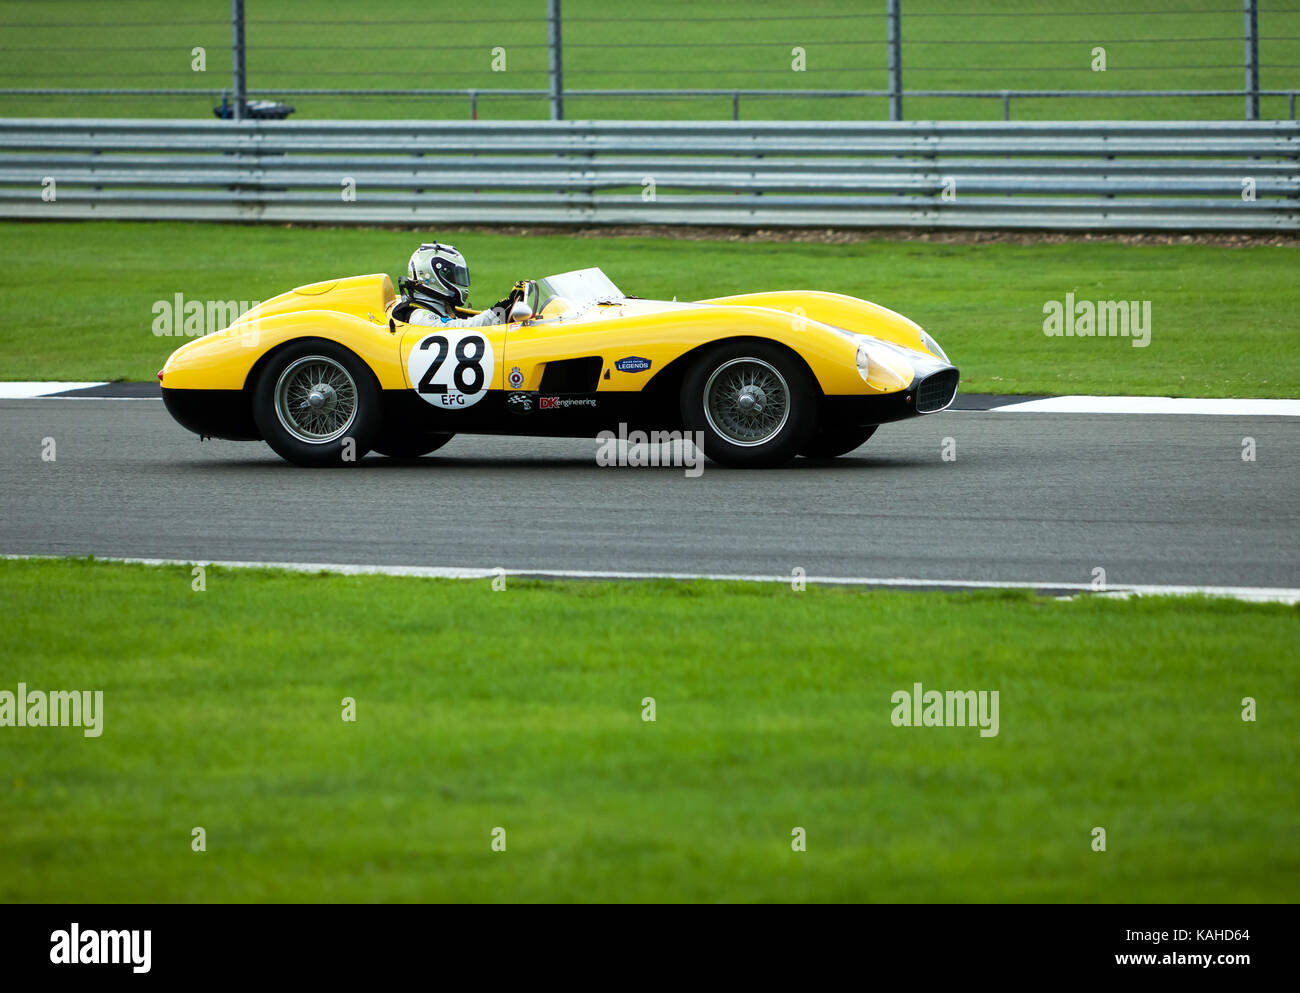 David Cottingham driving his 1956, Ferrari 500 TRC  in the RAC Woodcote Trophy for Pre '56 Sports Cars, at the 2017 Silverstone Classic Stock Photo